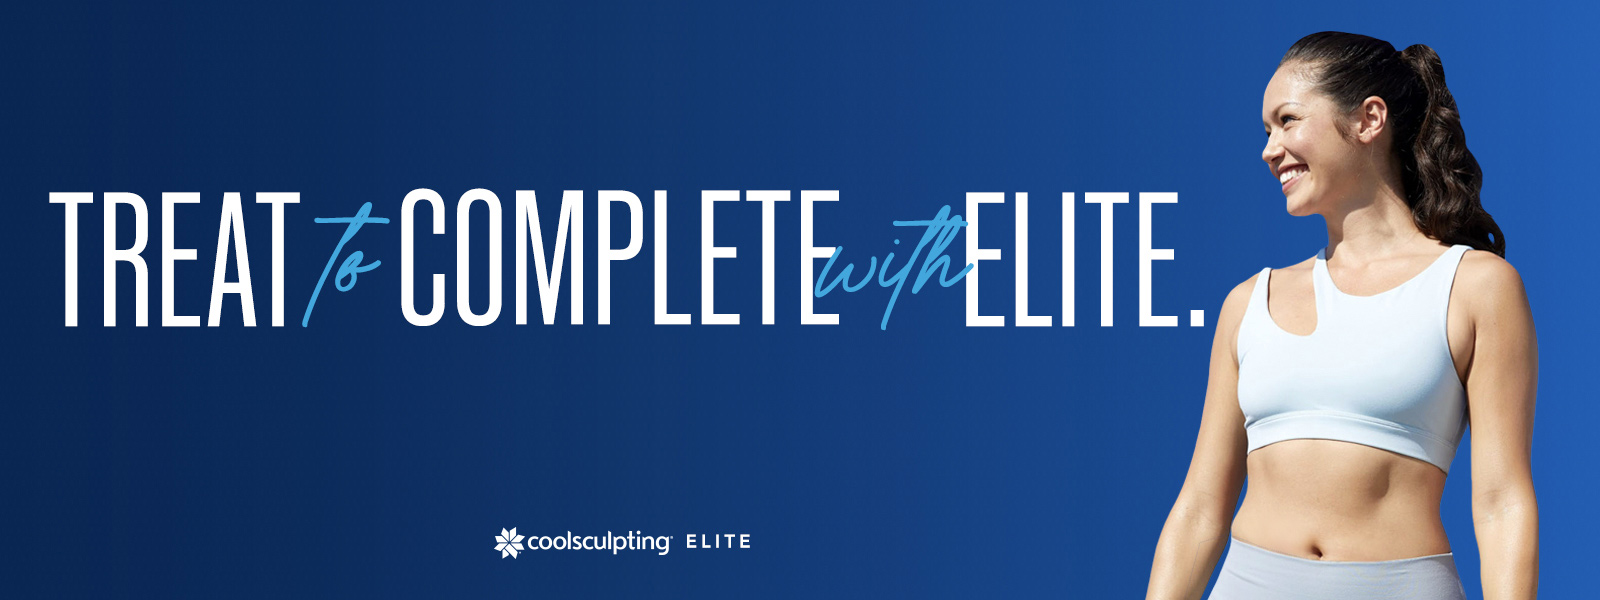 CoolSculpting Elite advertisement showing a patient model in athletic clothing